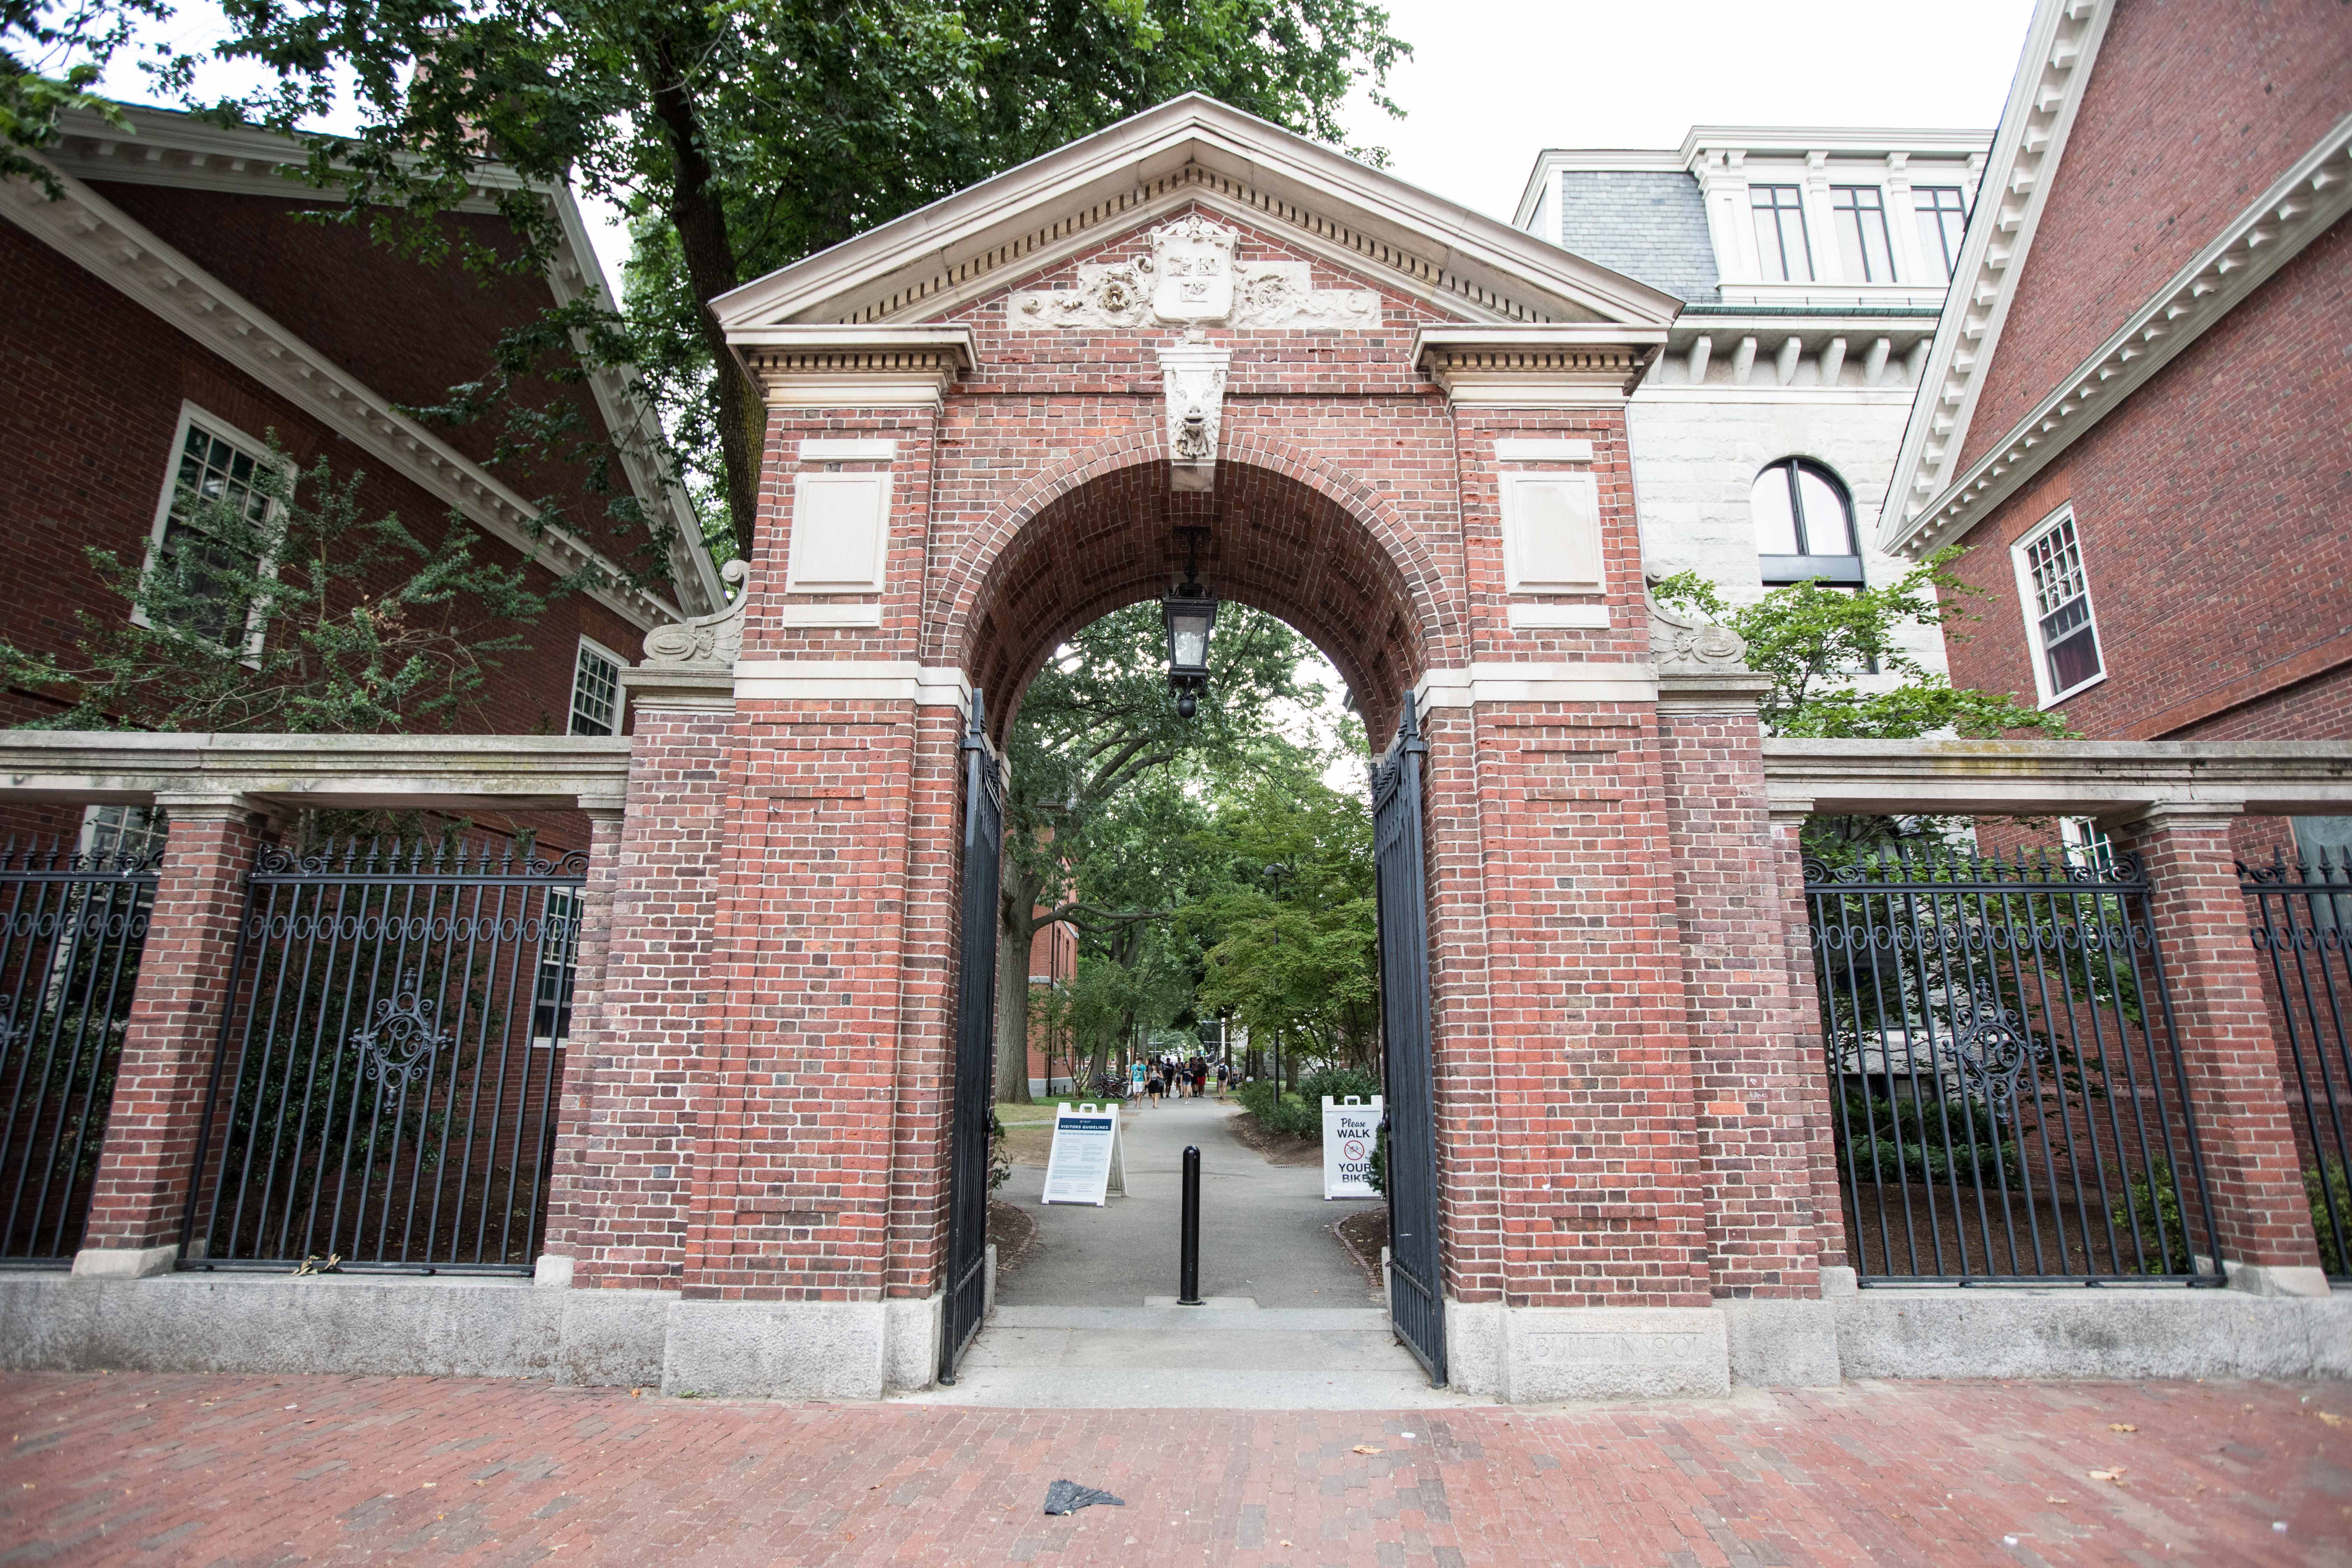 The entrance to Harvard Yard at Harvard University on August 30, 2018. (Scott Eisen/Getty Images)